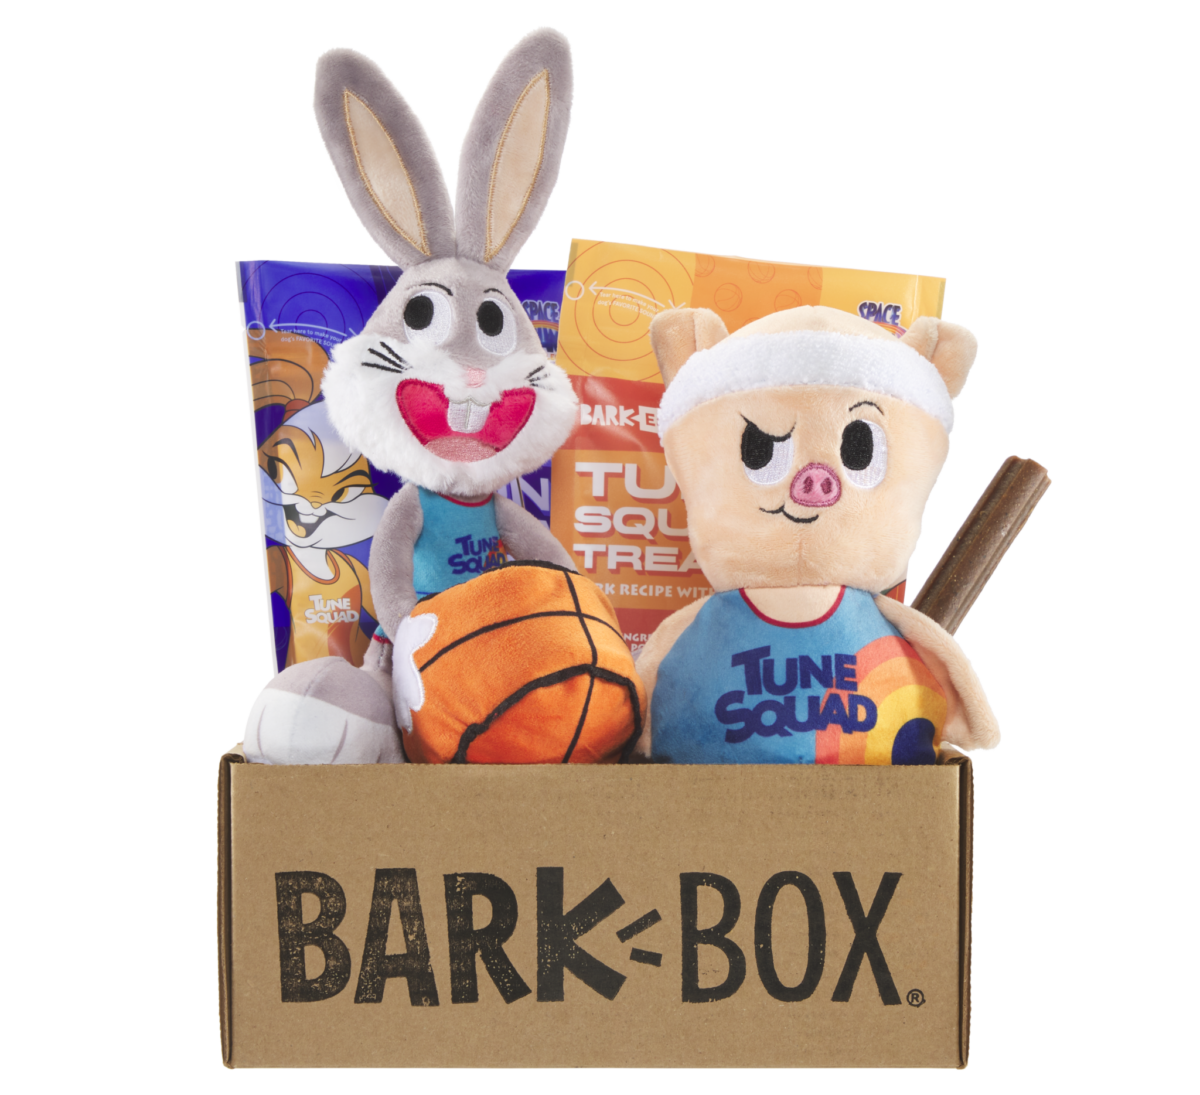 July Barkbox Space Jam Theme with toys and treat